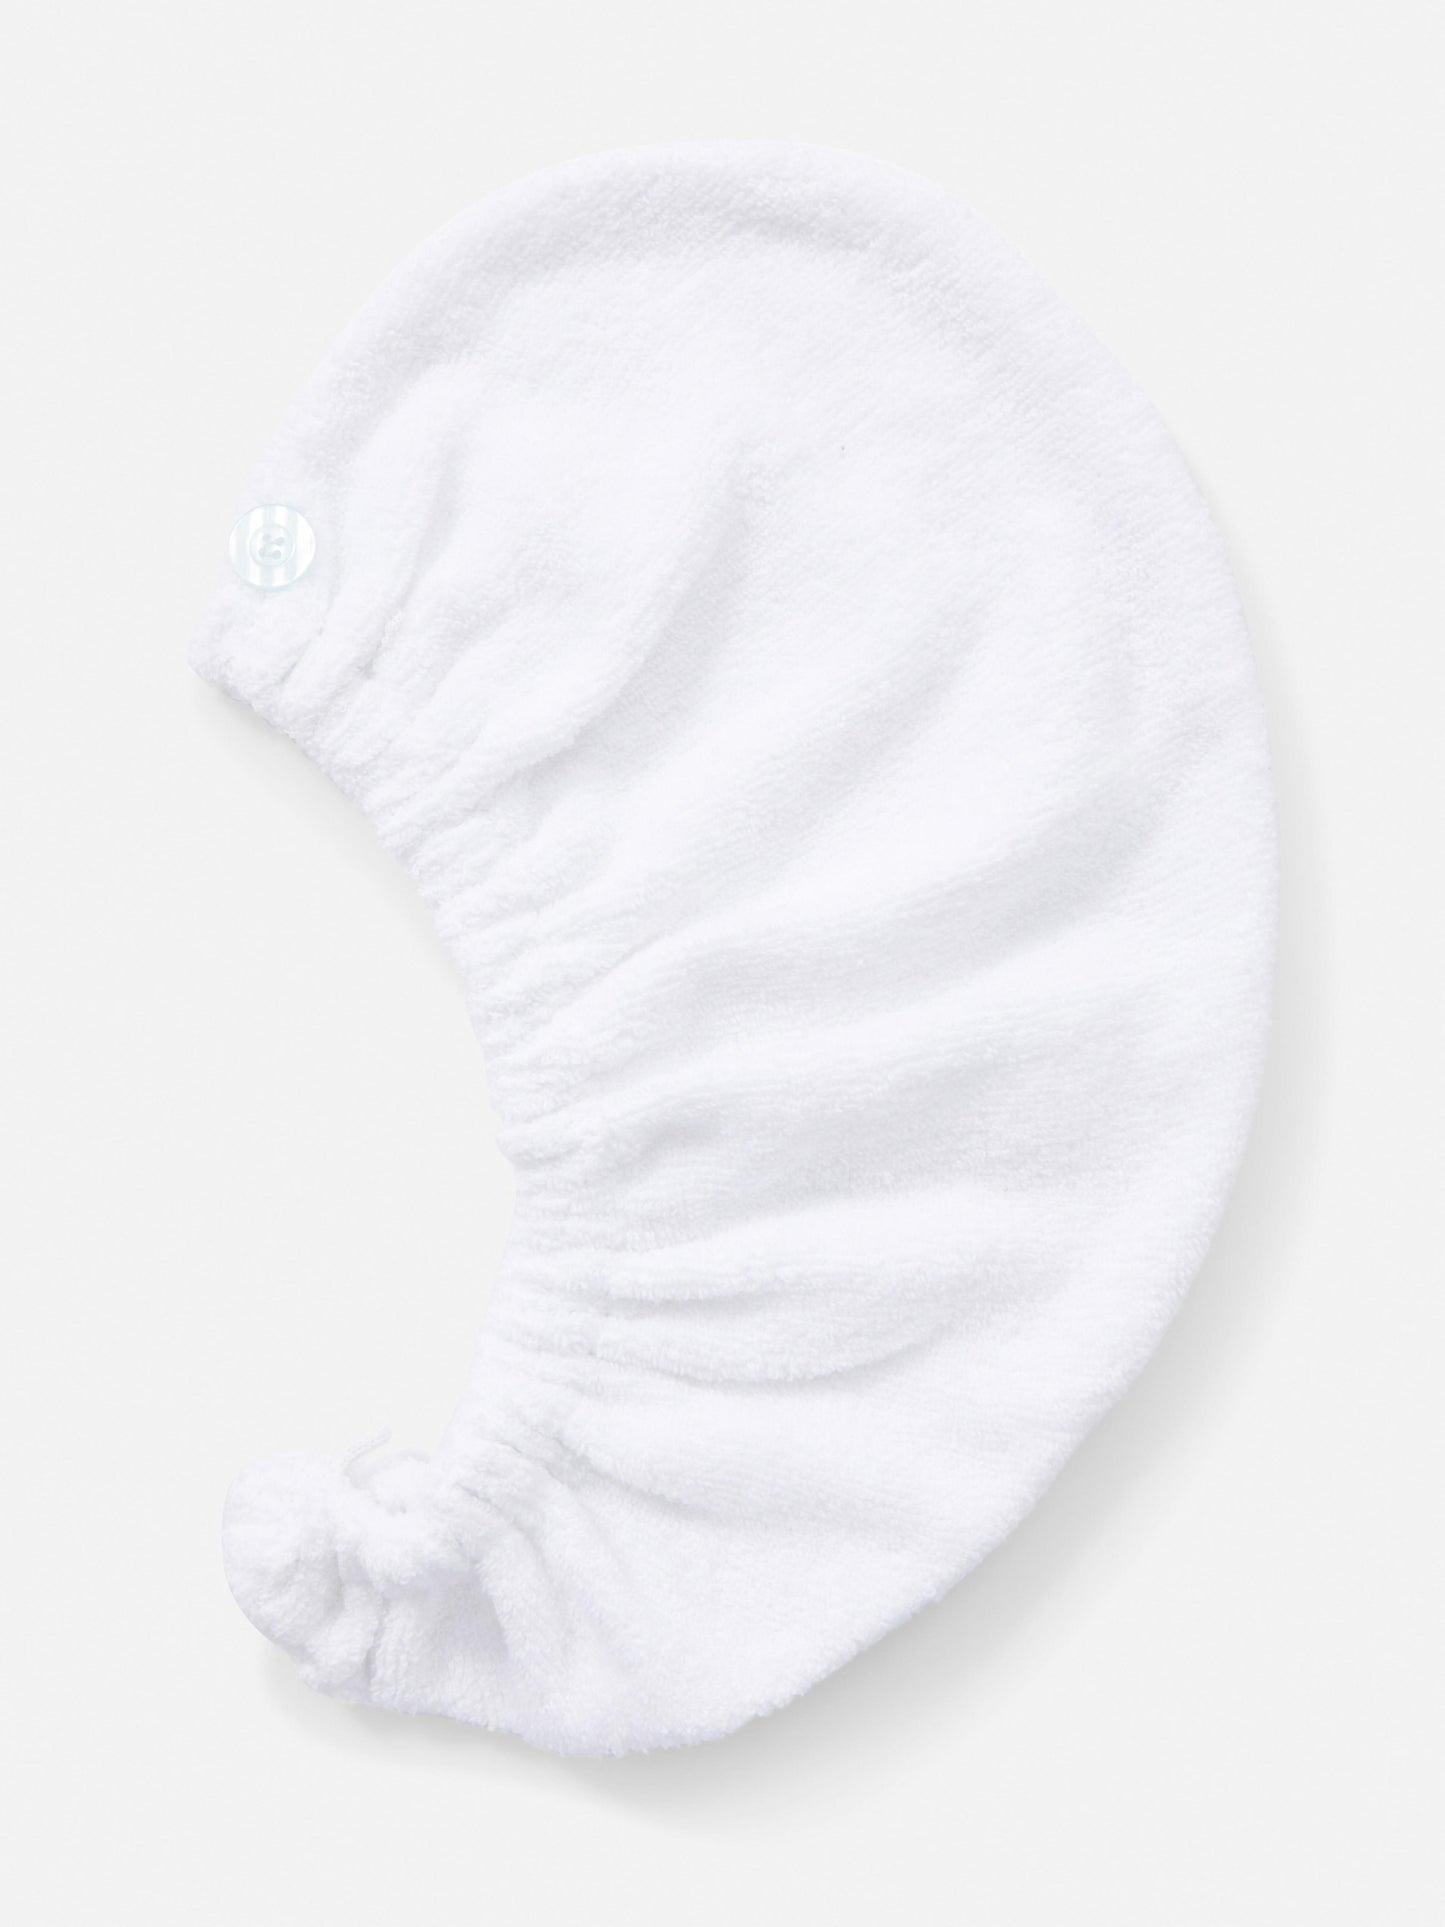 Soft 100% Cotton Exports Leftover Stretchable Head Towel Hair Wrap - HT001